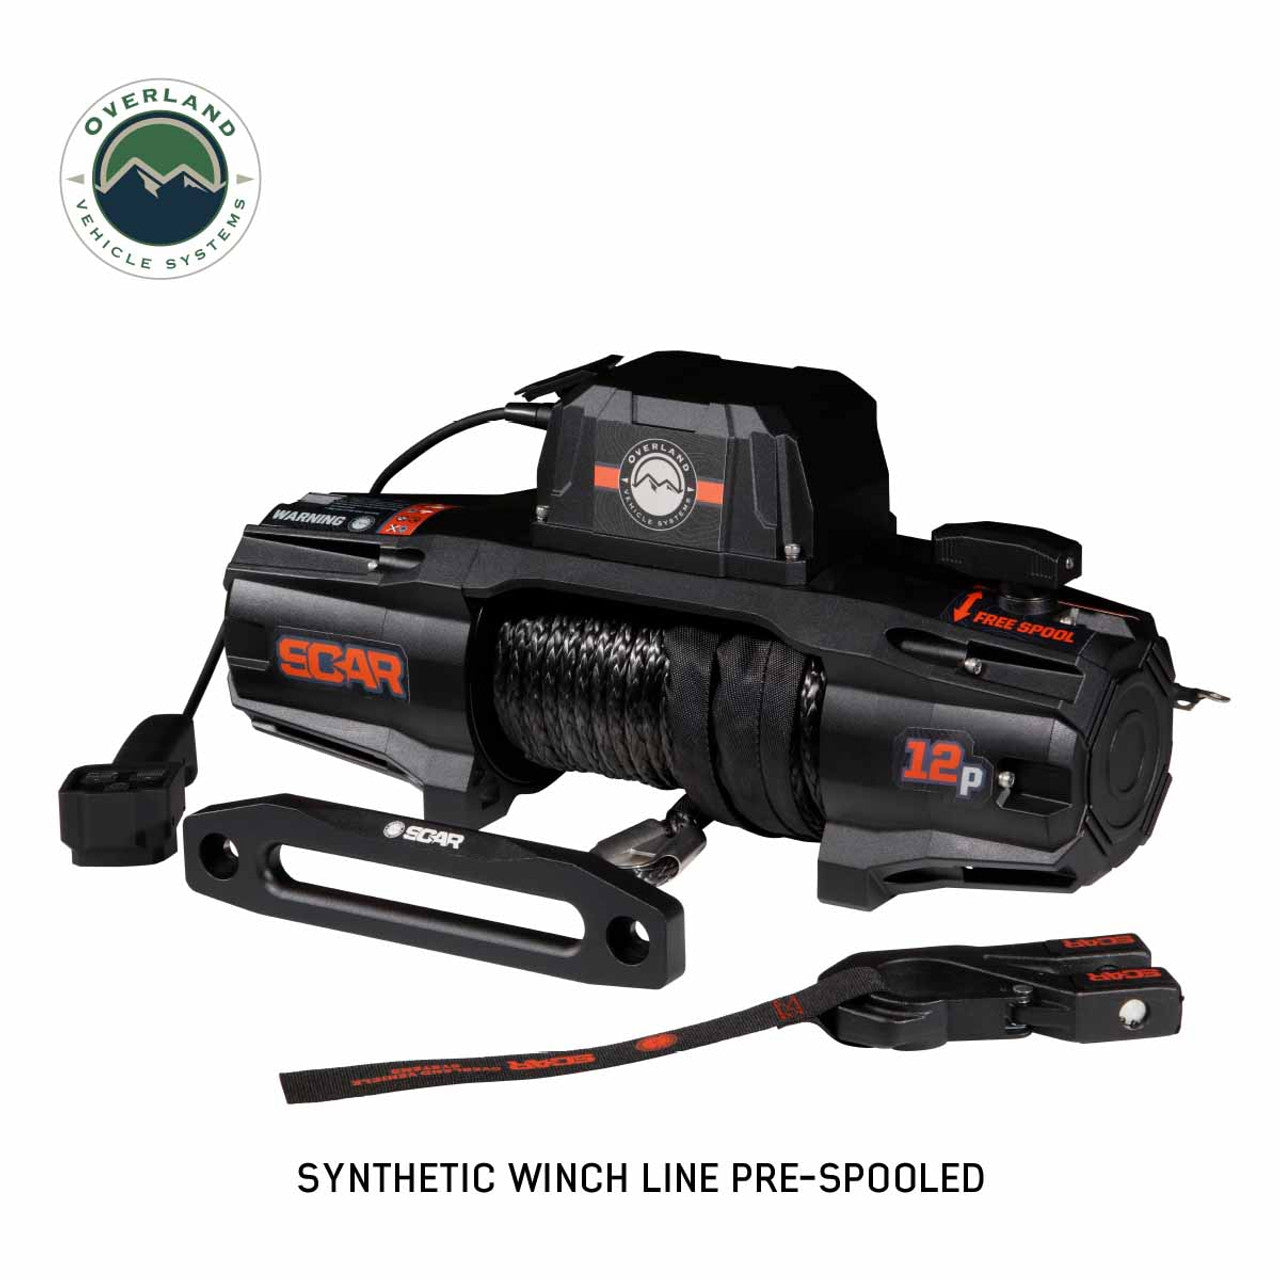 Overland Vehicle Systems SCAR 12S - 12,000 Lbs. Rated Synthetic Rope Winch